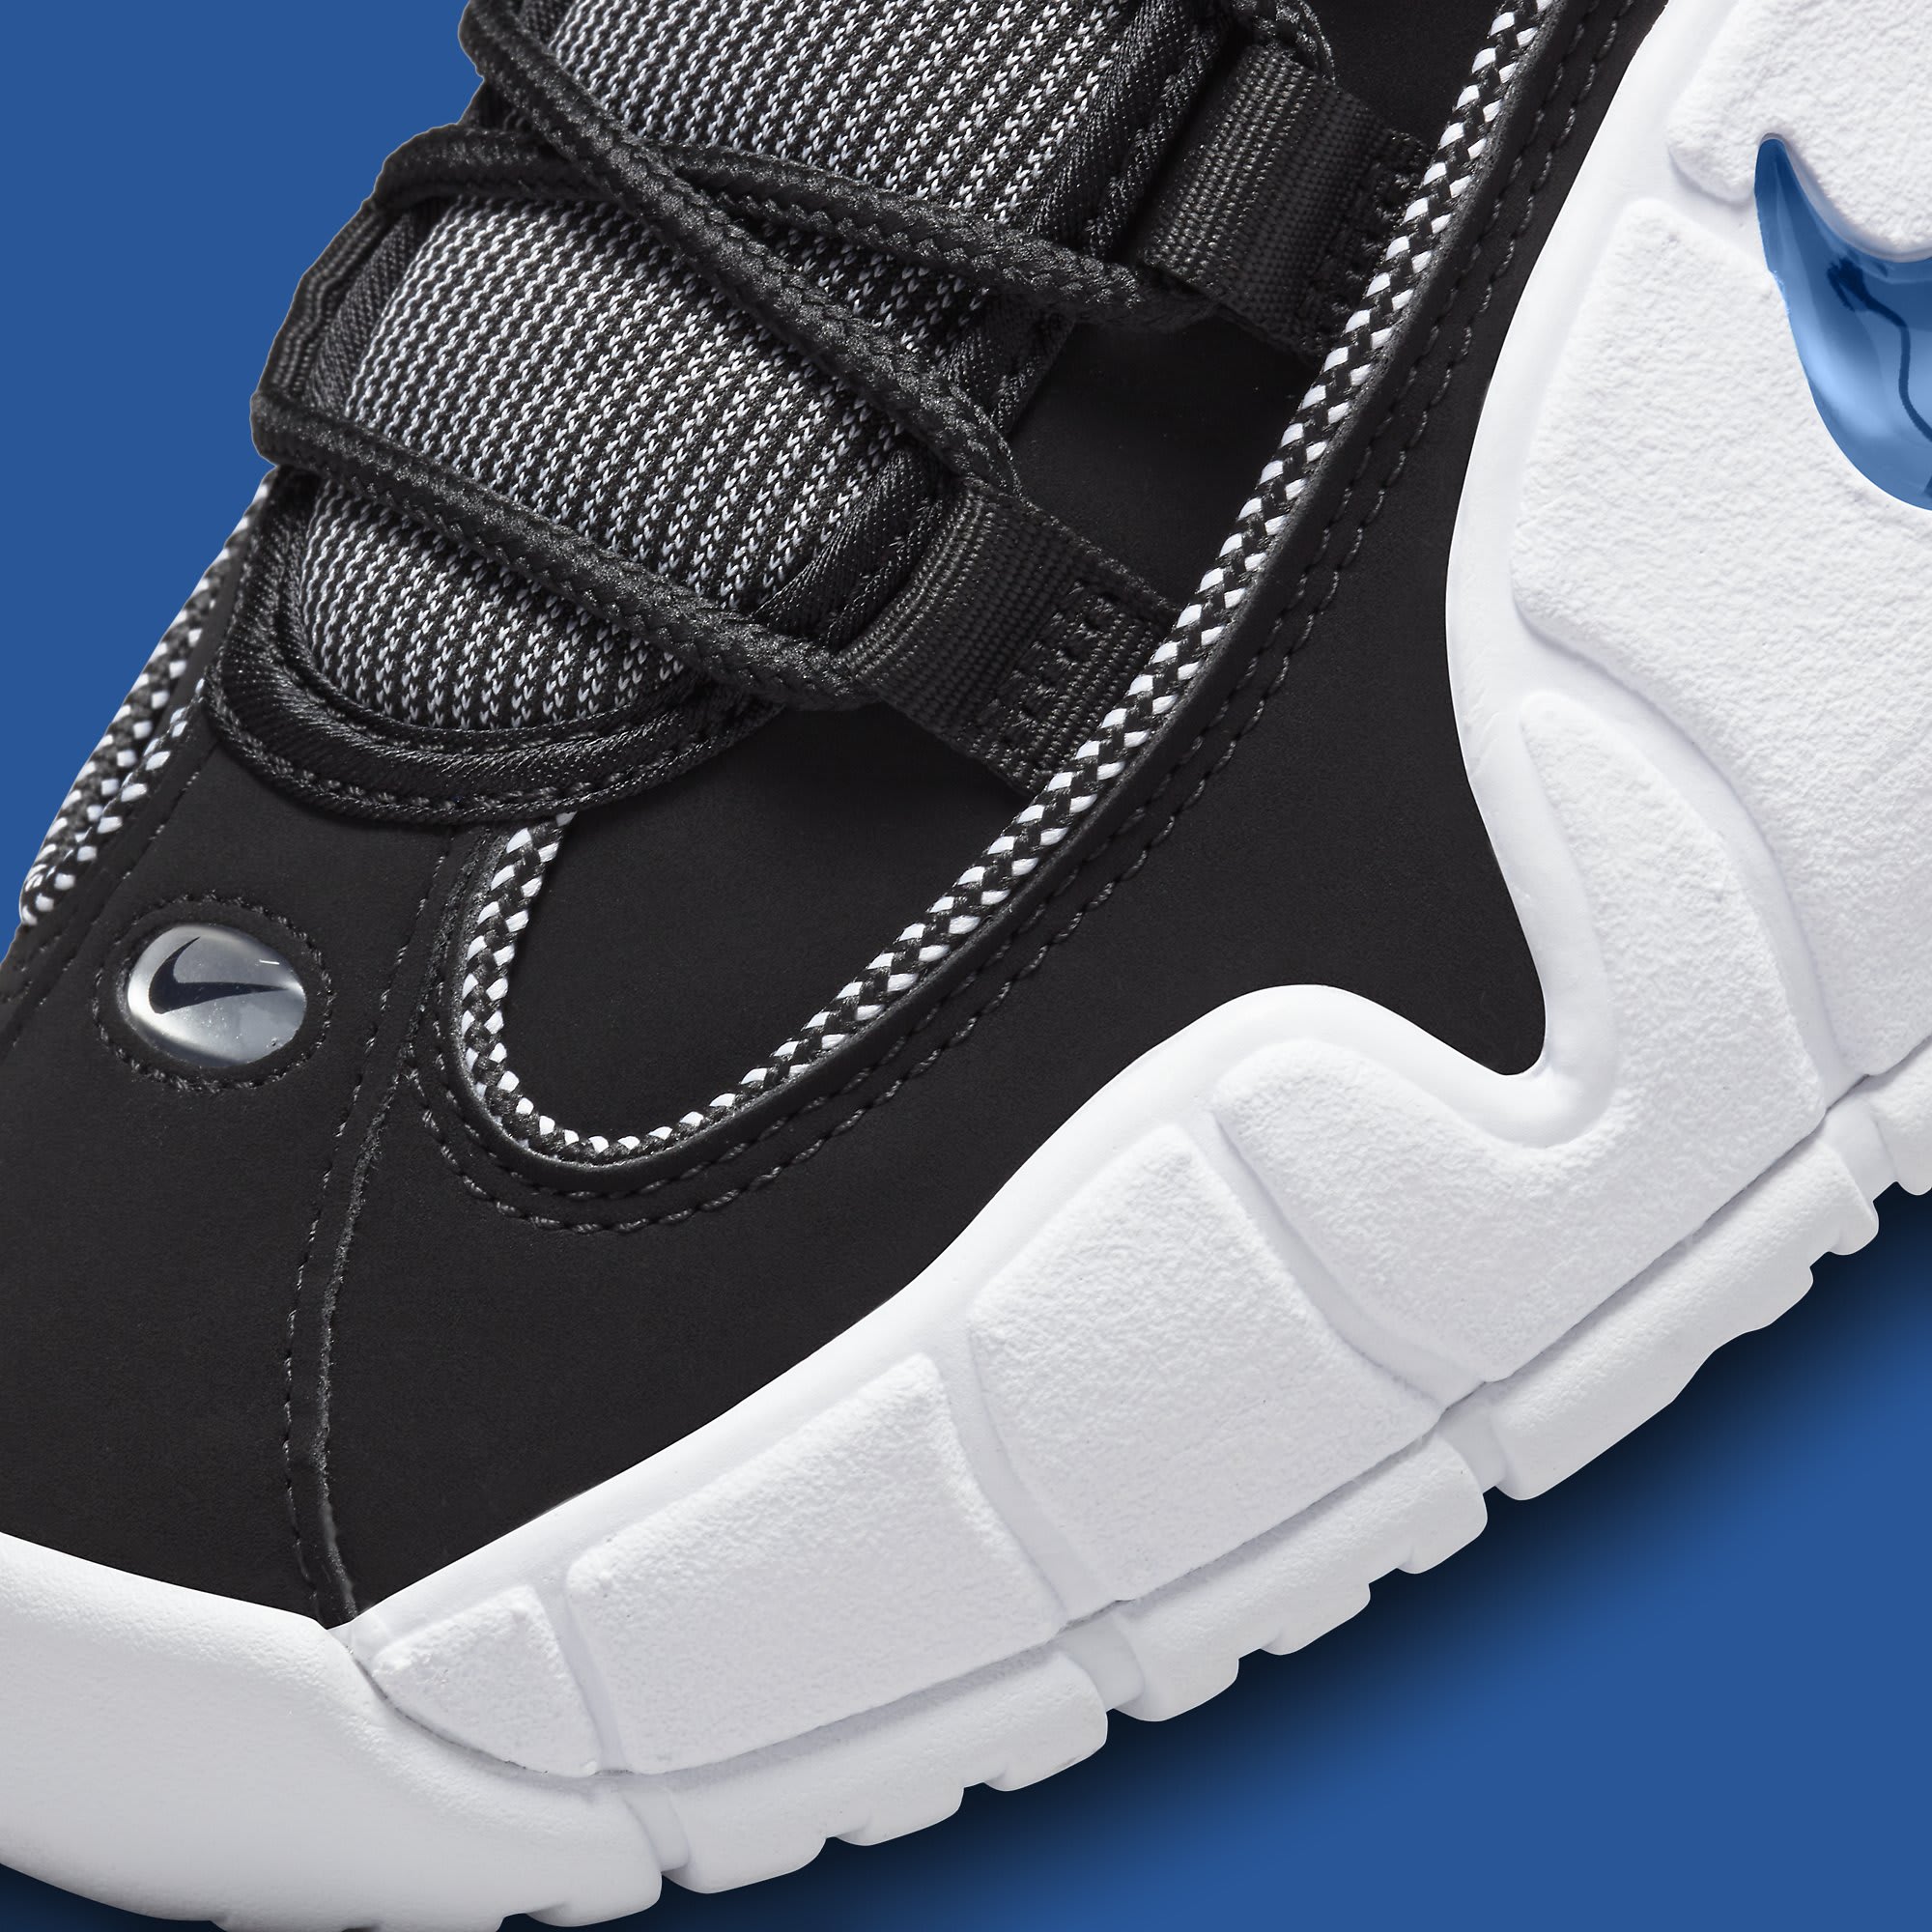 Nike Air Max Penny 1 Orlando Release Date Dn2487-001 Toe Detail